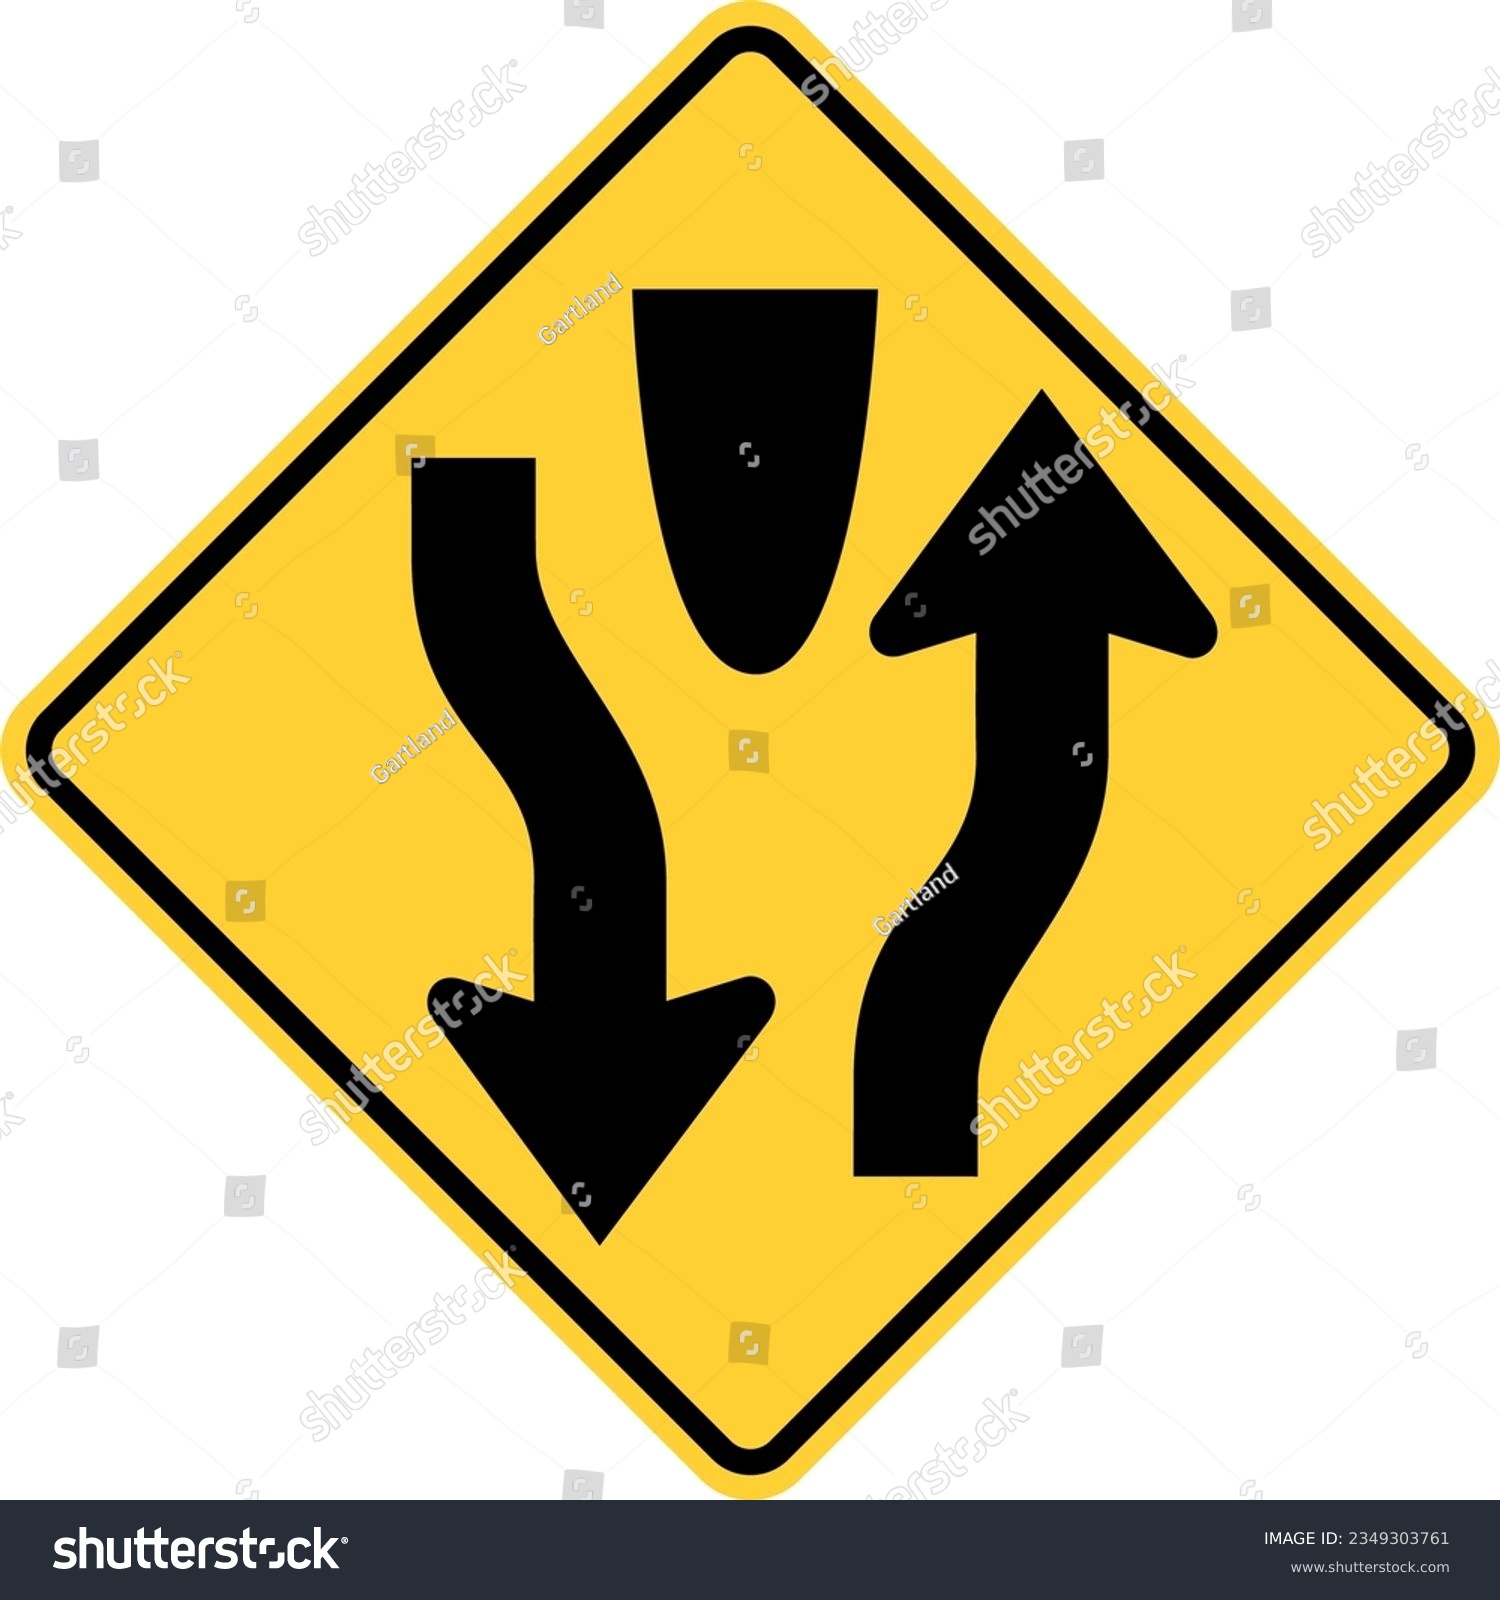 SVG of Vector graphic of a usa divided highway starts highway sign. It consists of two black arrows indicating the flow of traffic within a black and yellow square tilted to 45 degrees svg